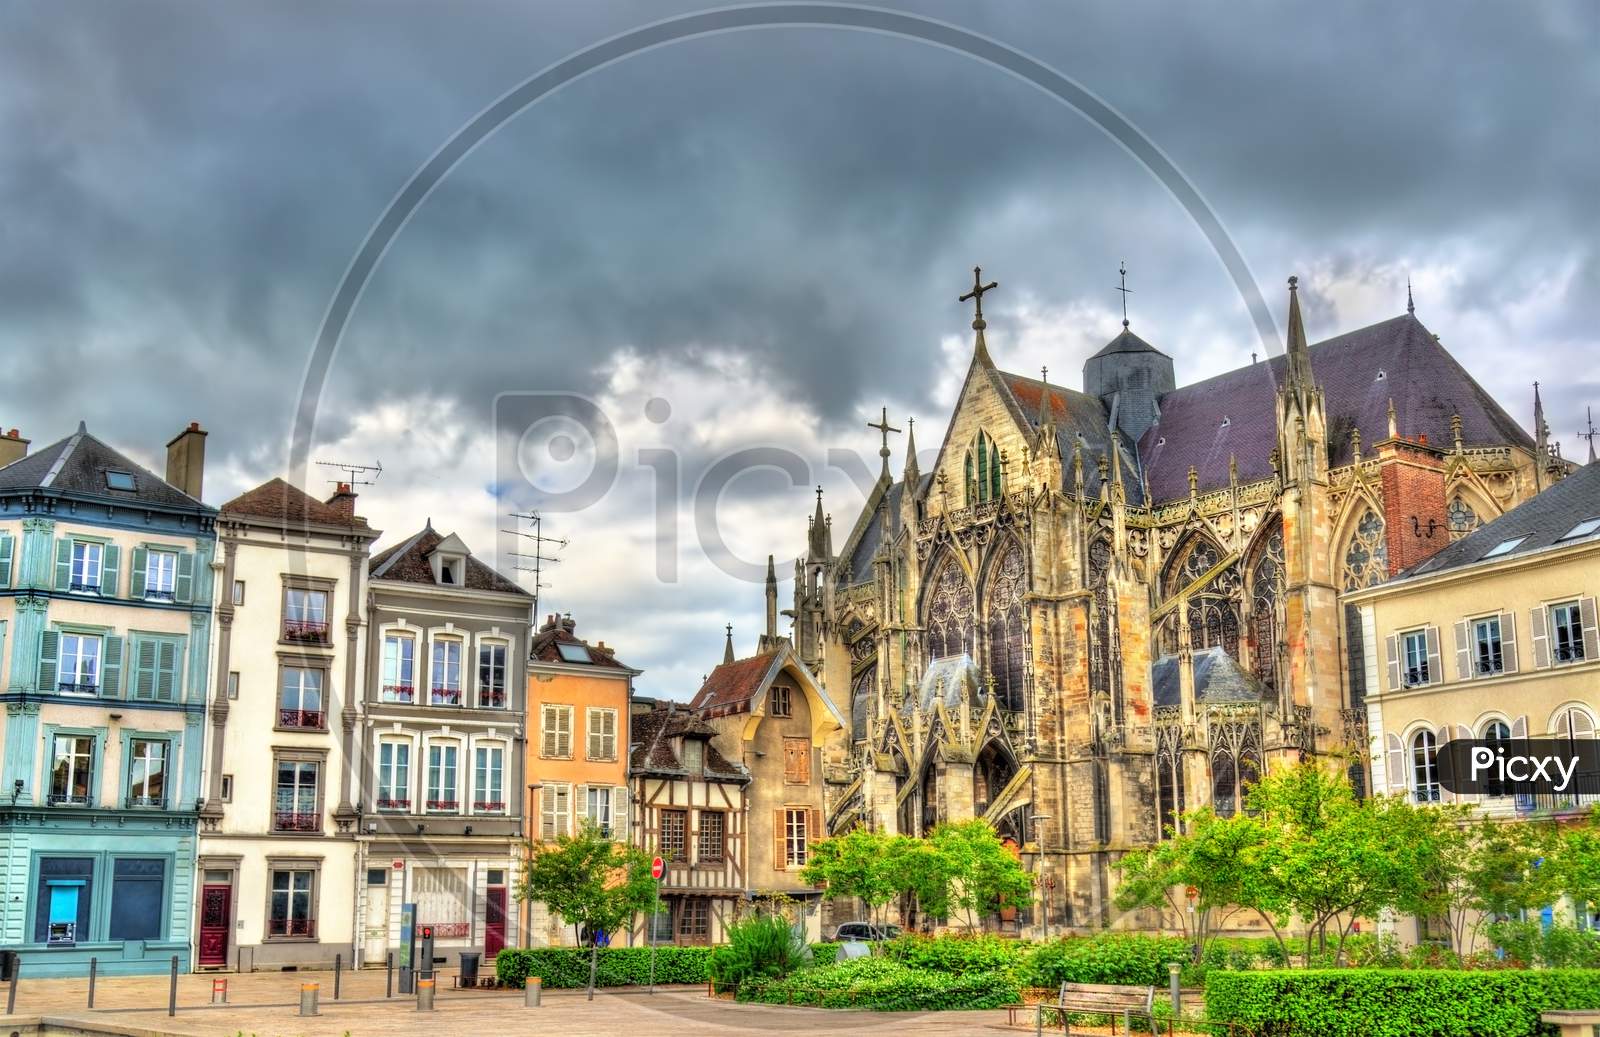 Gothic Basilica Saint Urbain Of Troyes In France